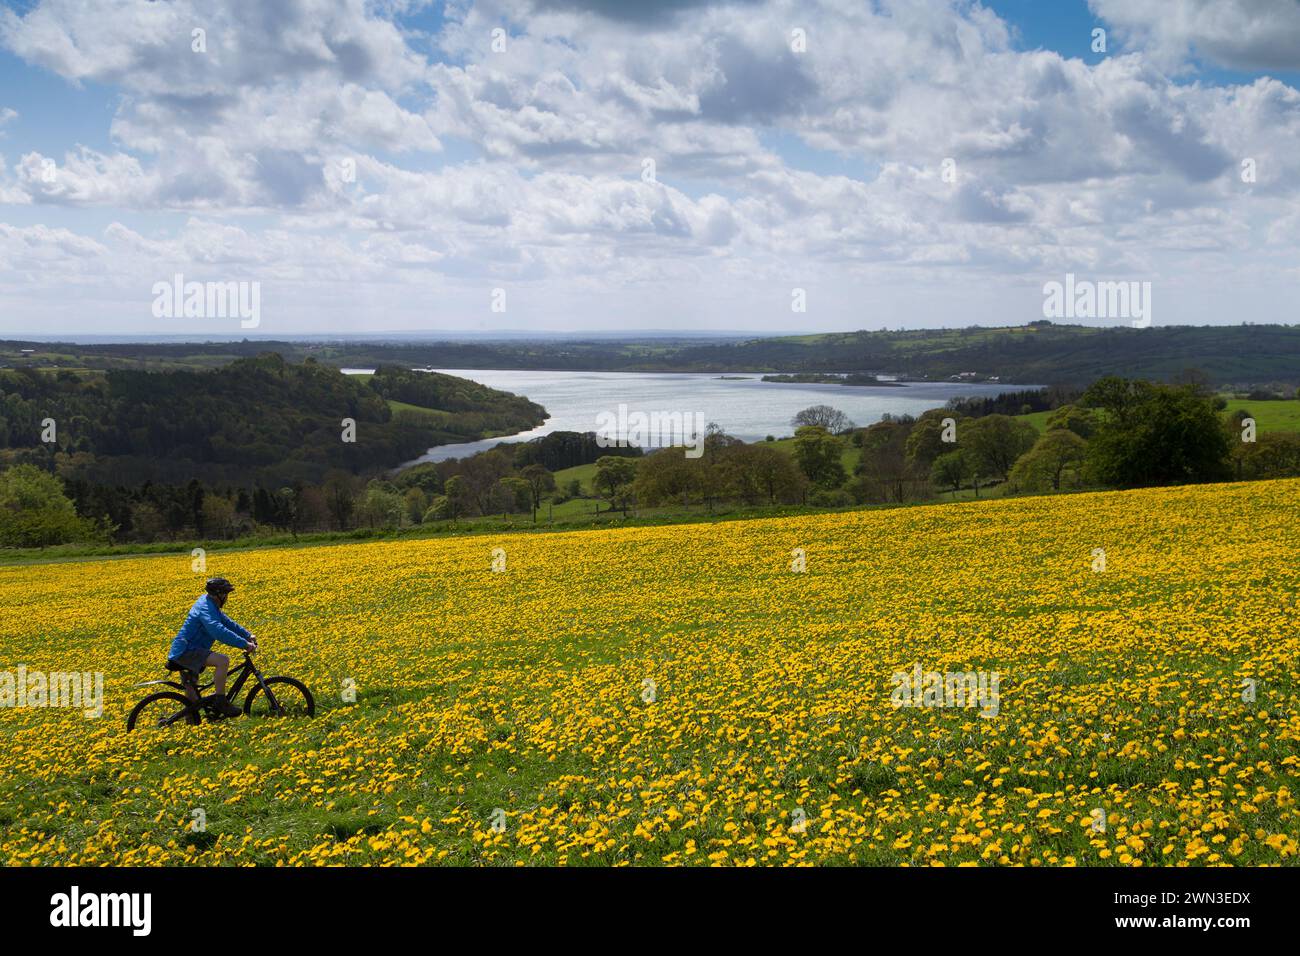 12/05/15  Pete Tye, 76, stops his bicycle near Middleton Top, Wirksworth, to catch his breath and marvel at a stunning vista of acres of dandelions st Stock Photo